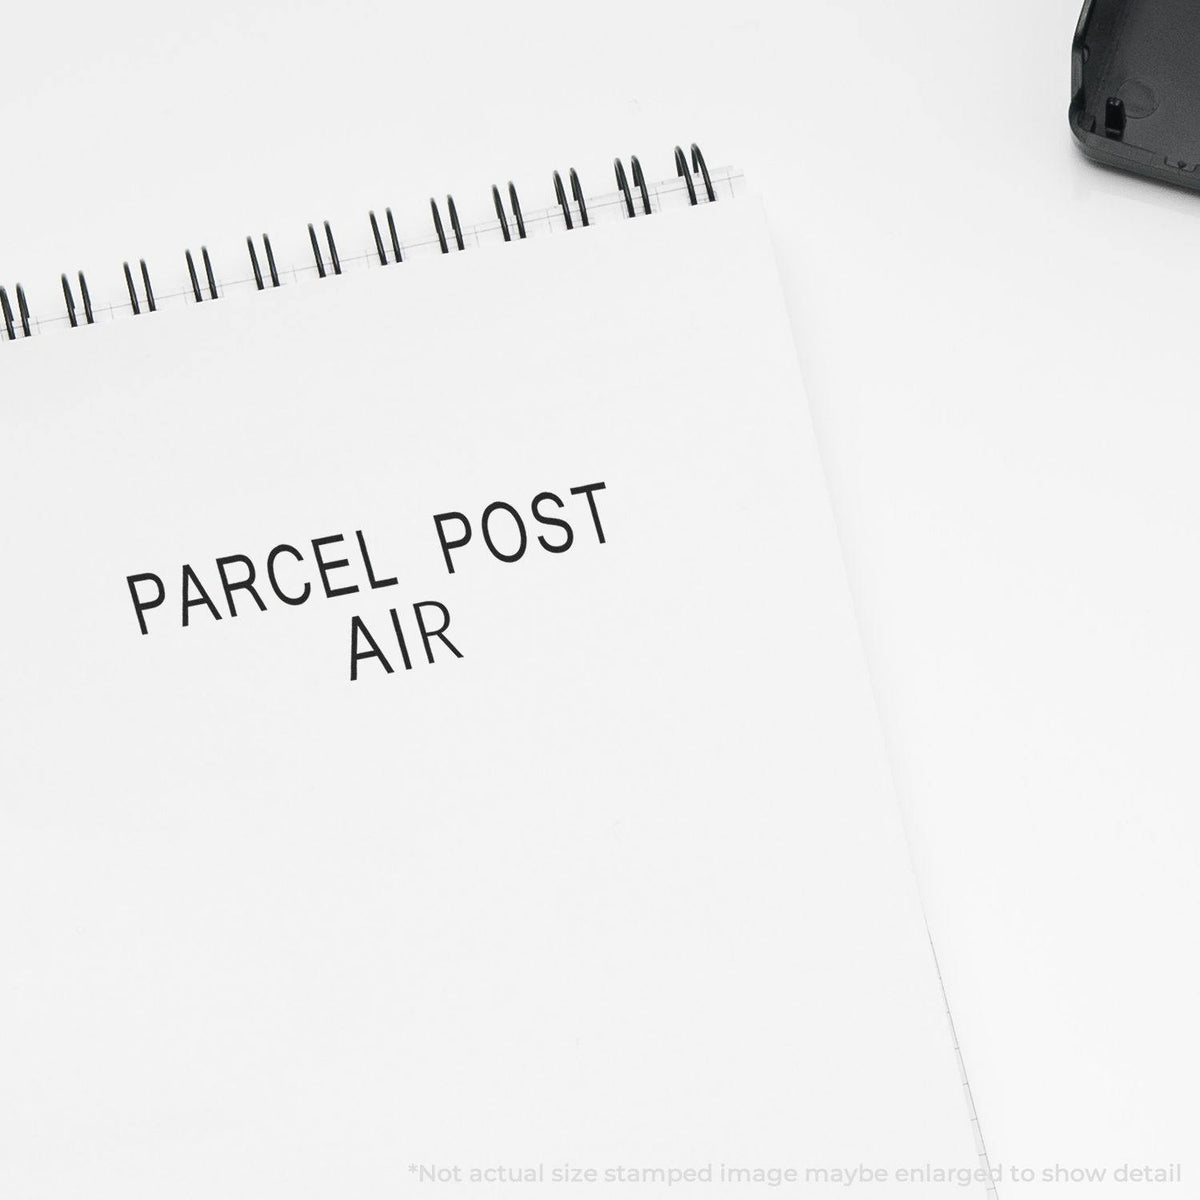 Large Parcel Post Air Rubber Stamp In Use Photo